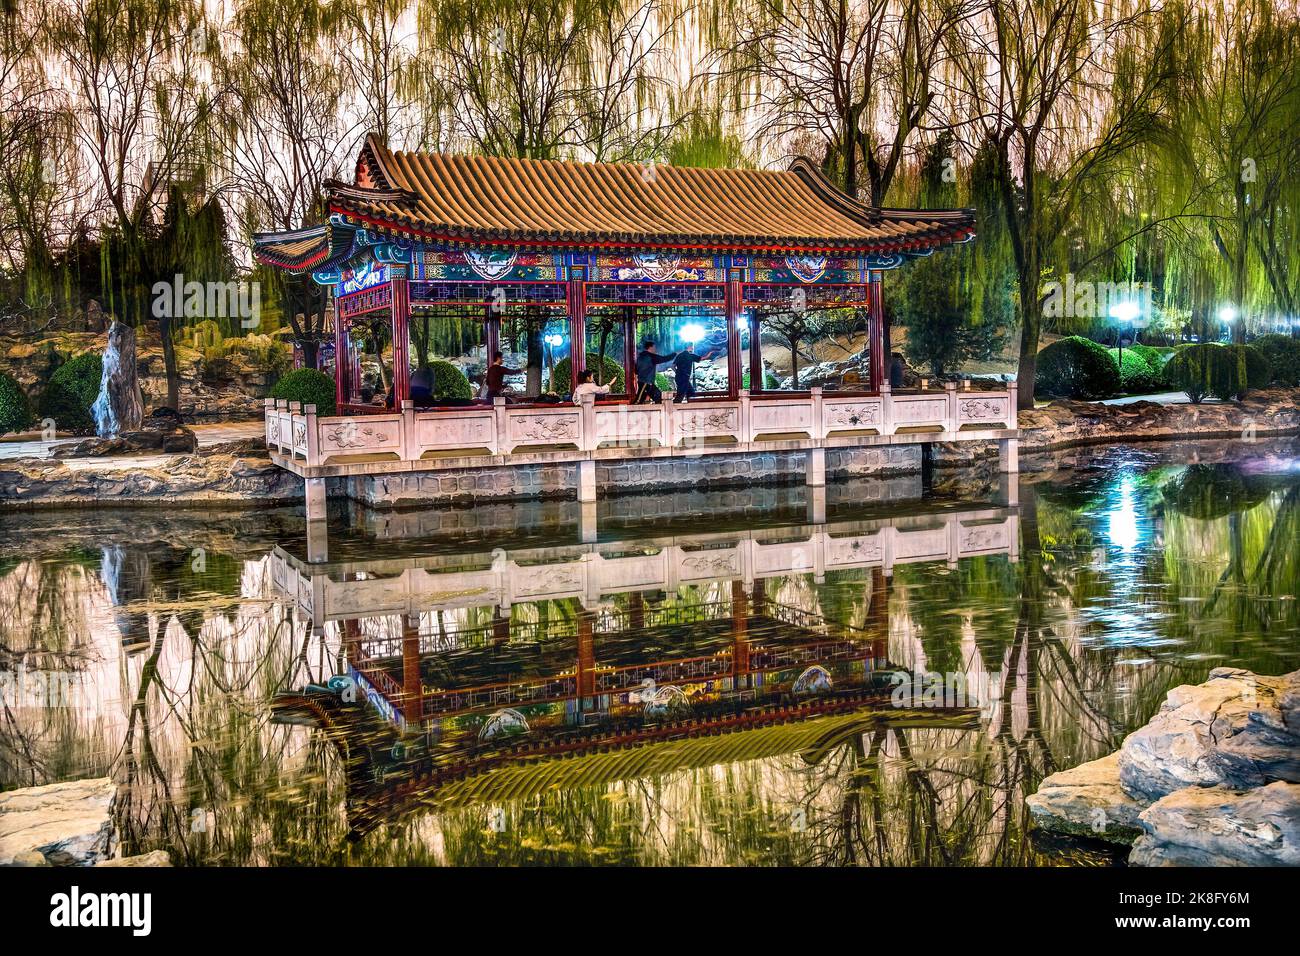 Wushu in Park Practicing Tai Chi Temple of Sun Pavilion Pond Reflection Green Willows Beijing China Stock Photo